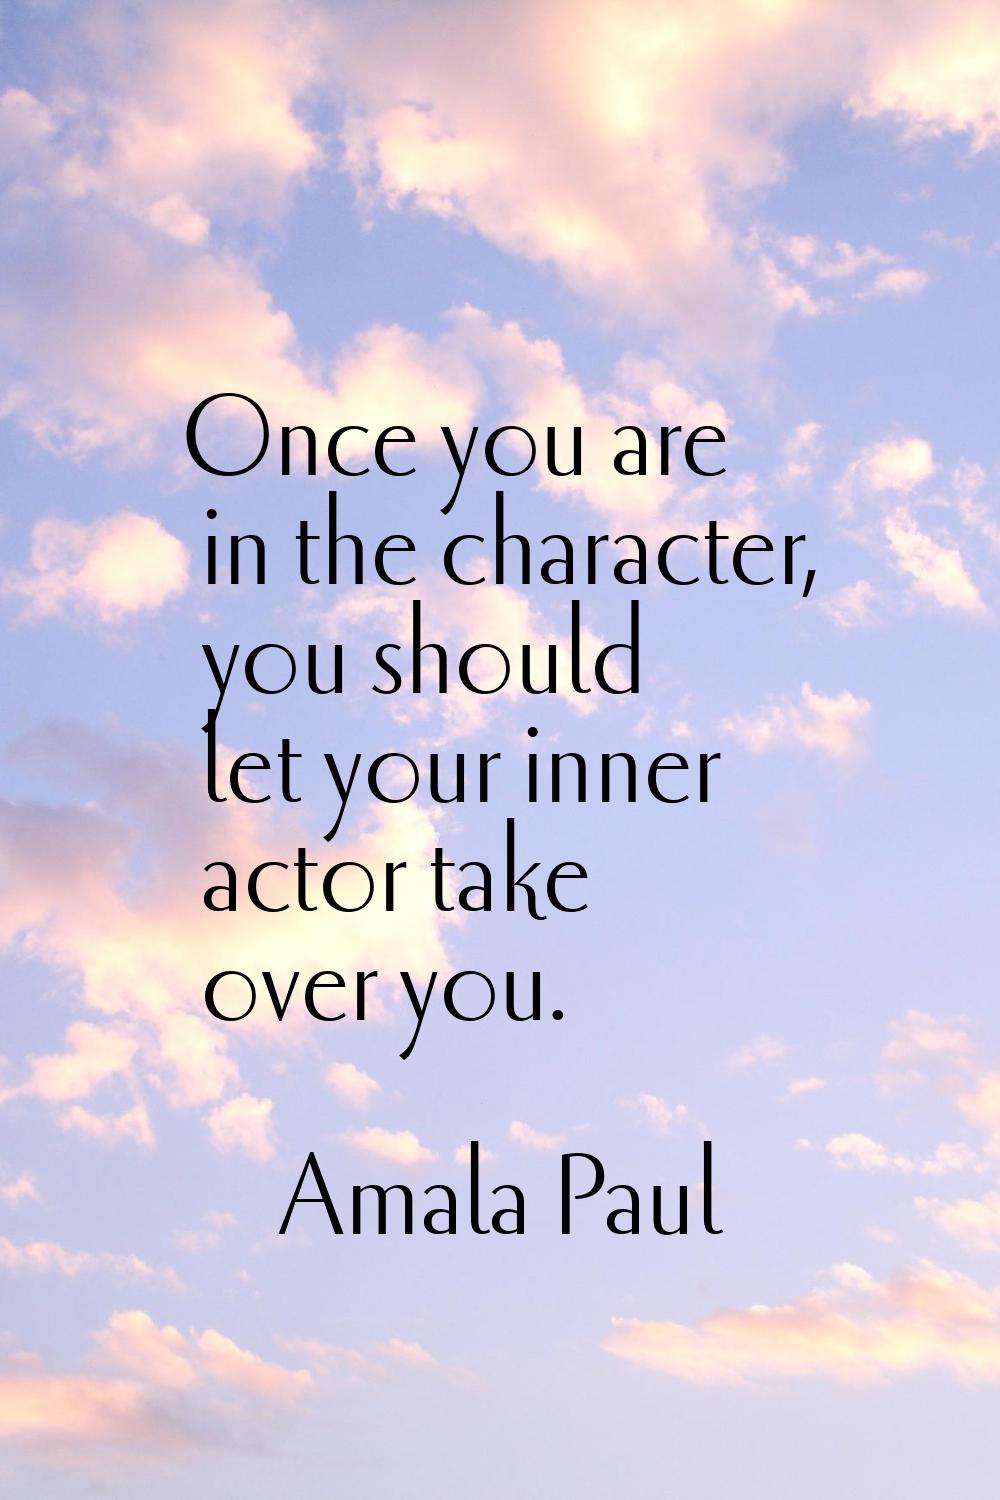 Once you are in the character, you should let your inner actor take over you.